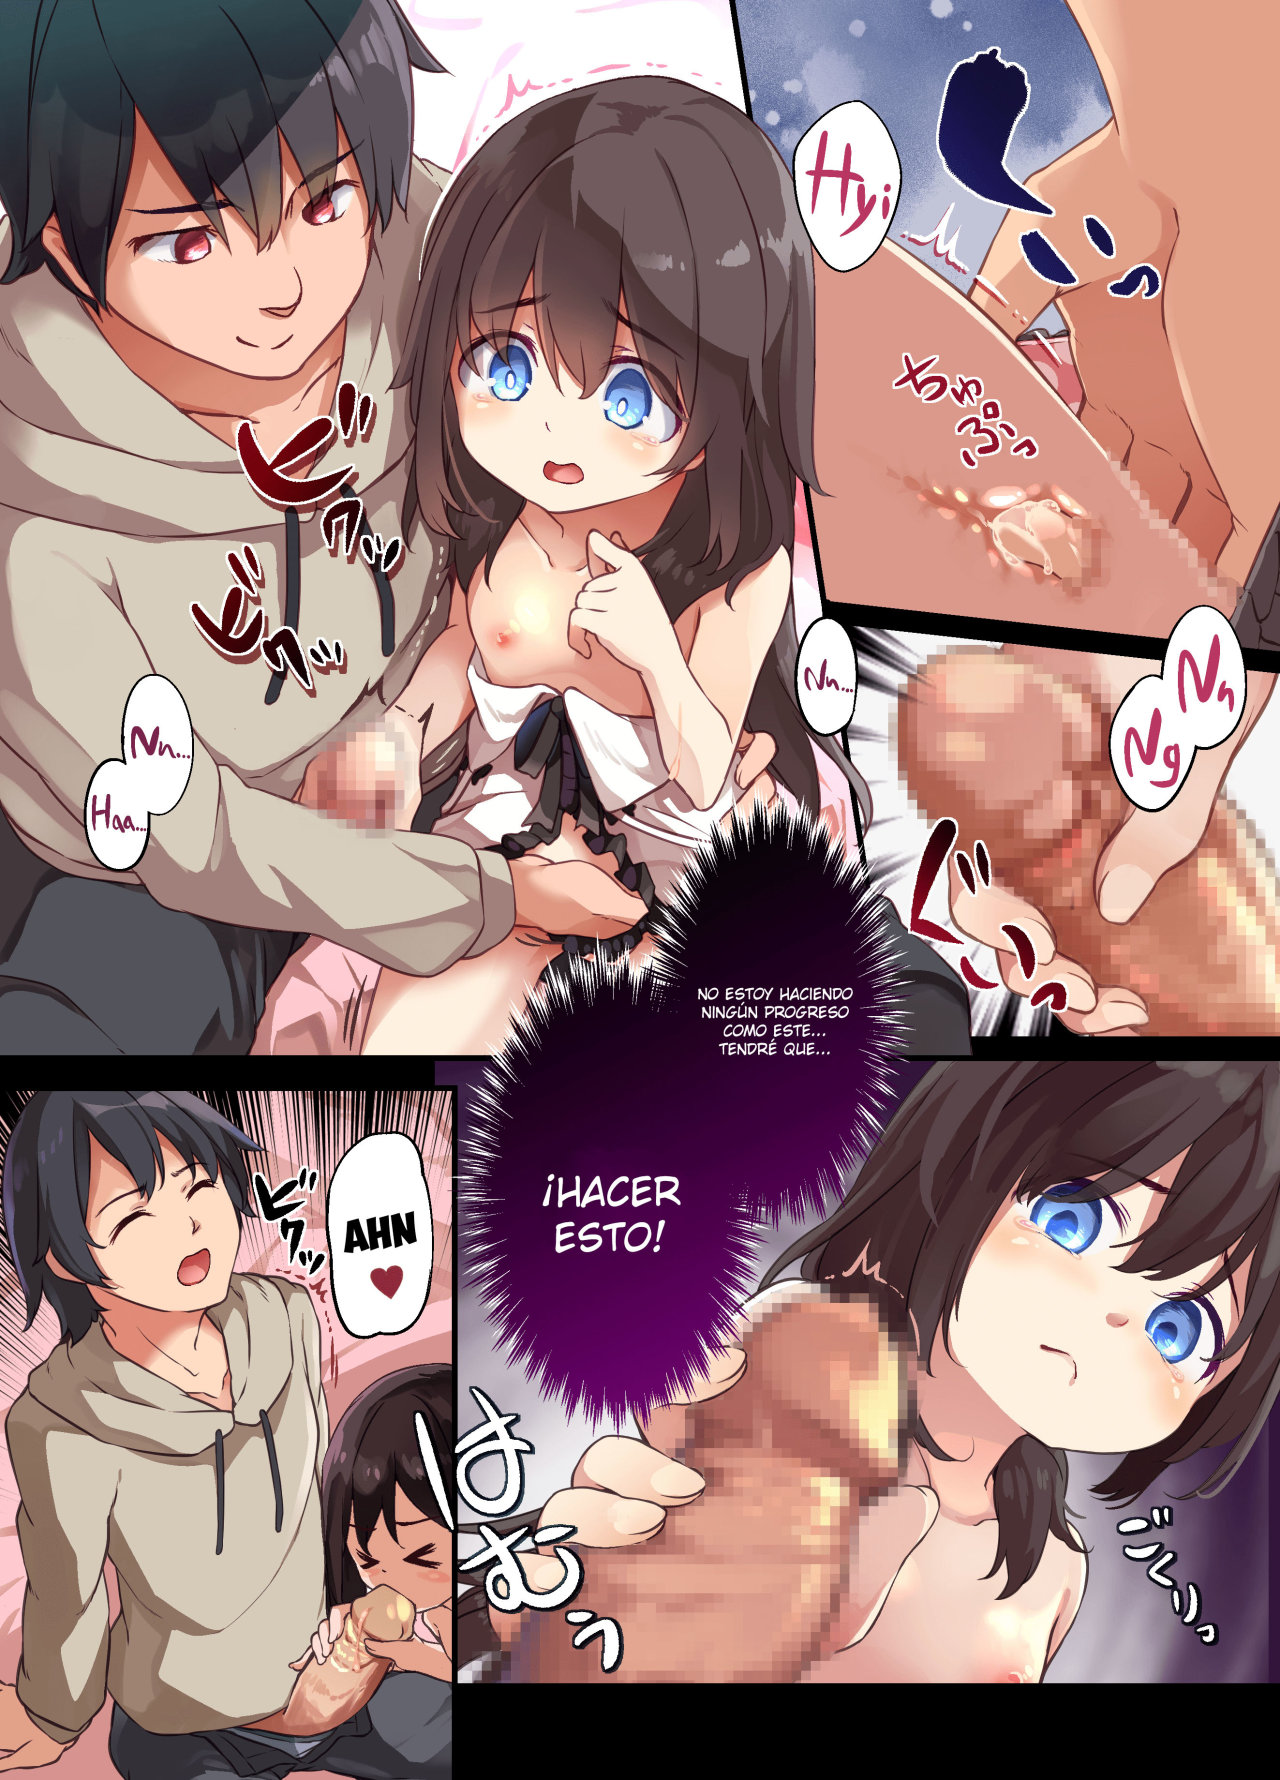 A Yandere Little Sister wants to be impregnated by her big brother - 21